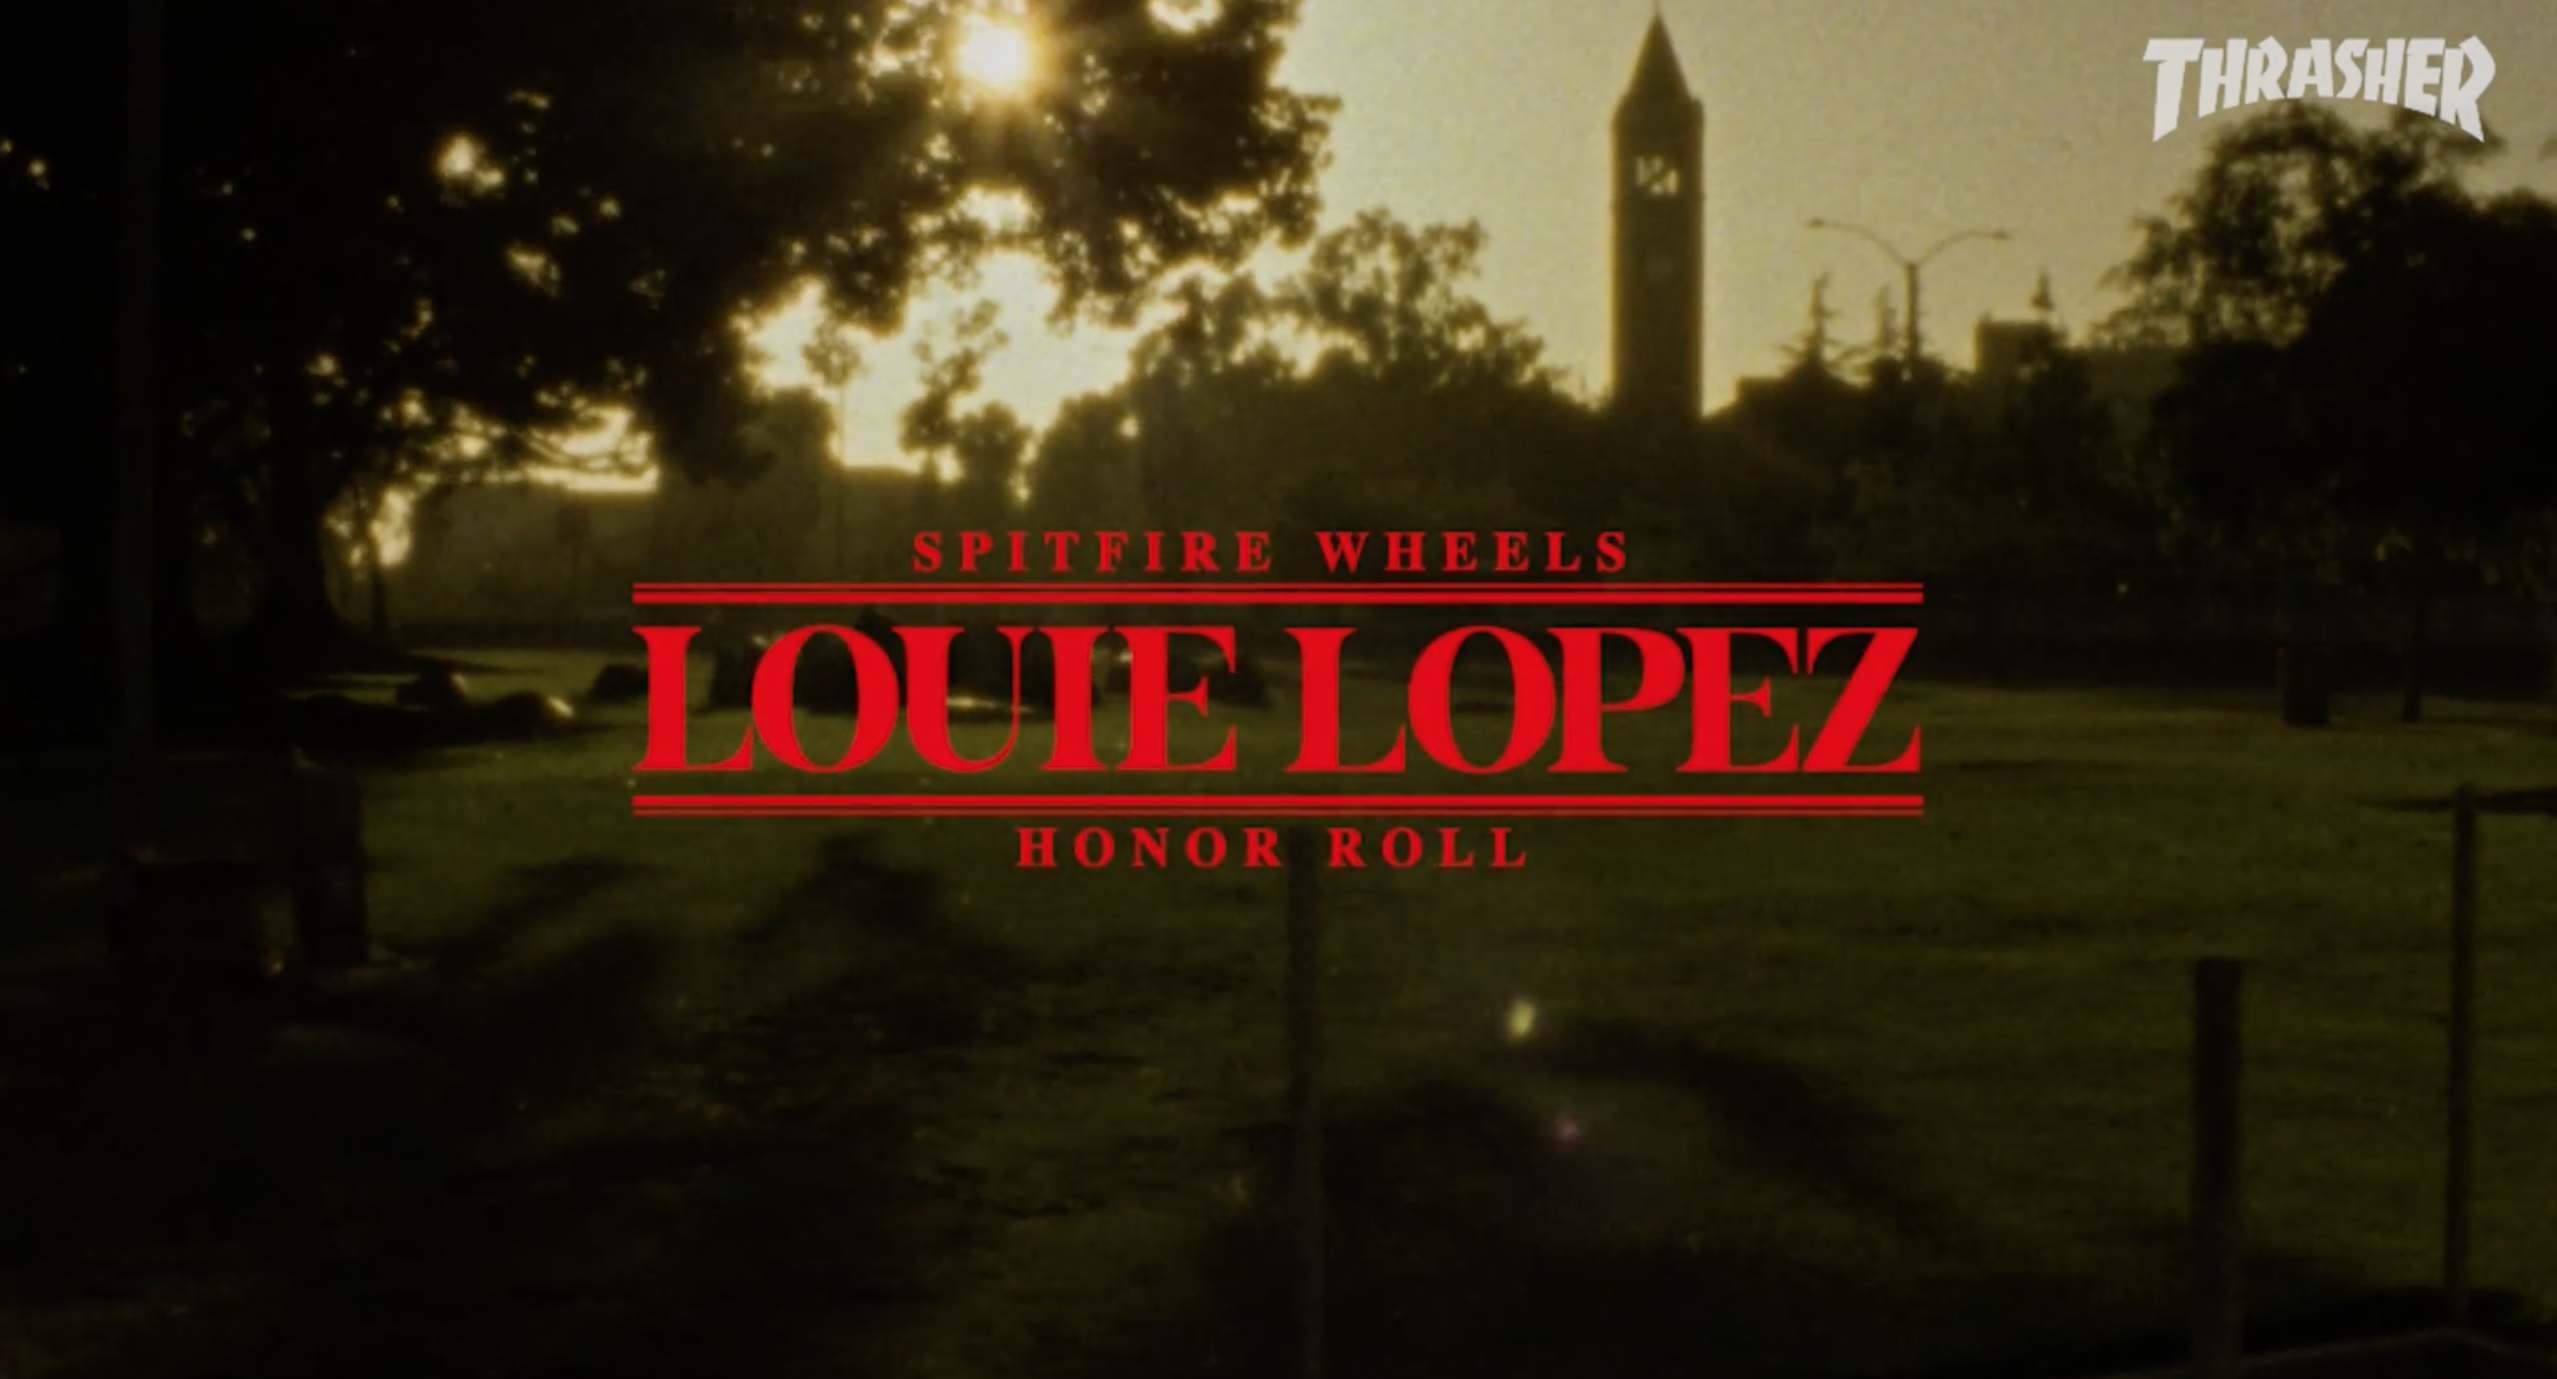 Spitfire - Louie Lopez "Honor Roll" cover art